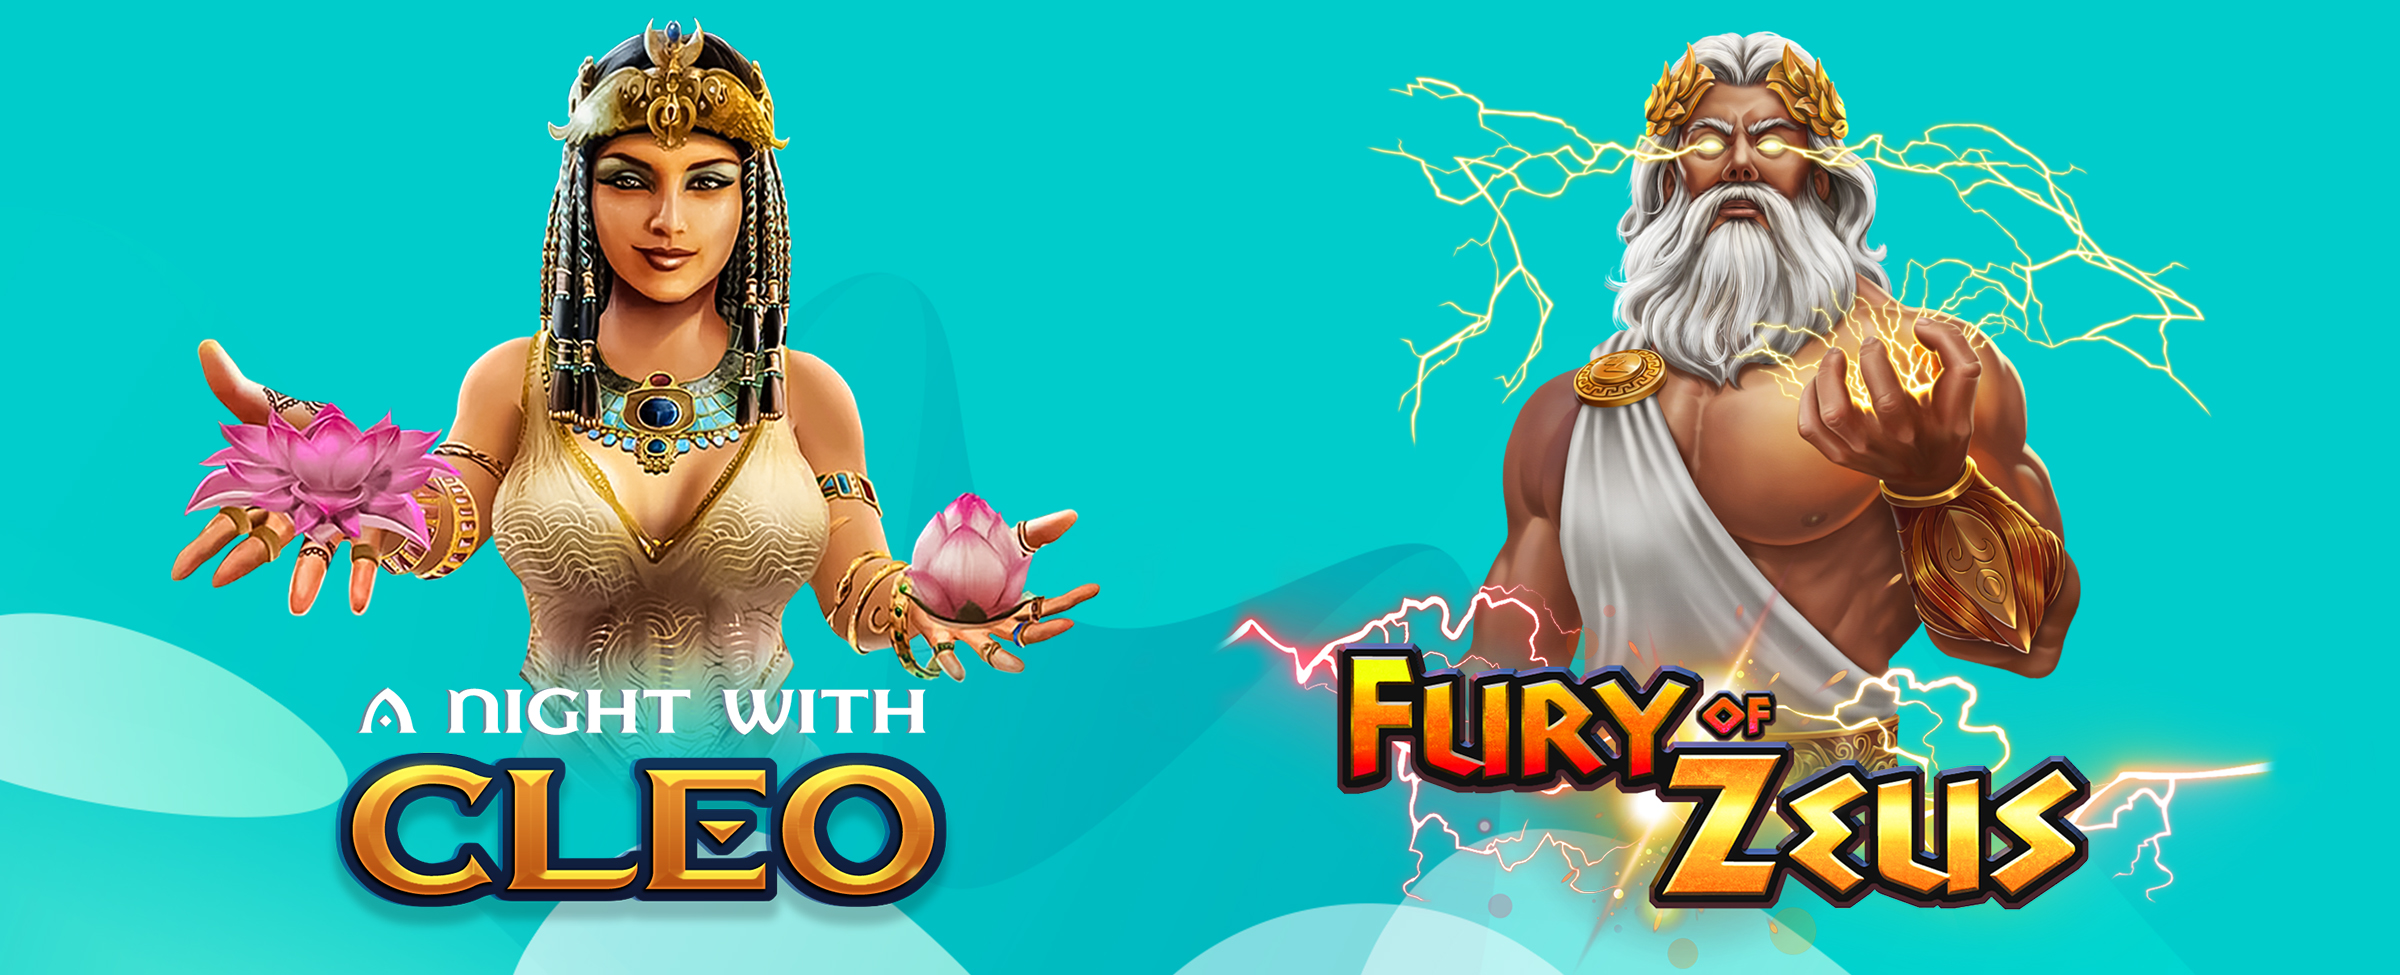 Warm up with A Night With Cleo and Fury of Zeus – these two games will have you jumping for gold in no time.